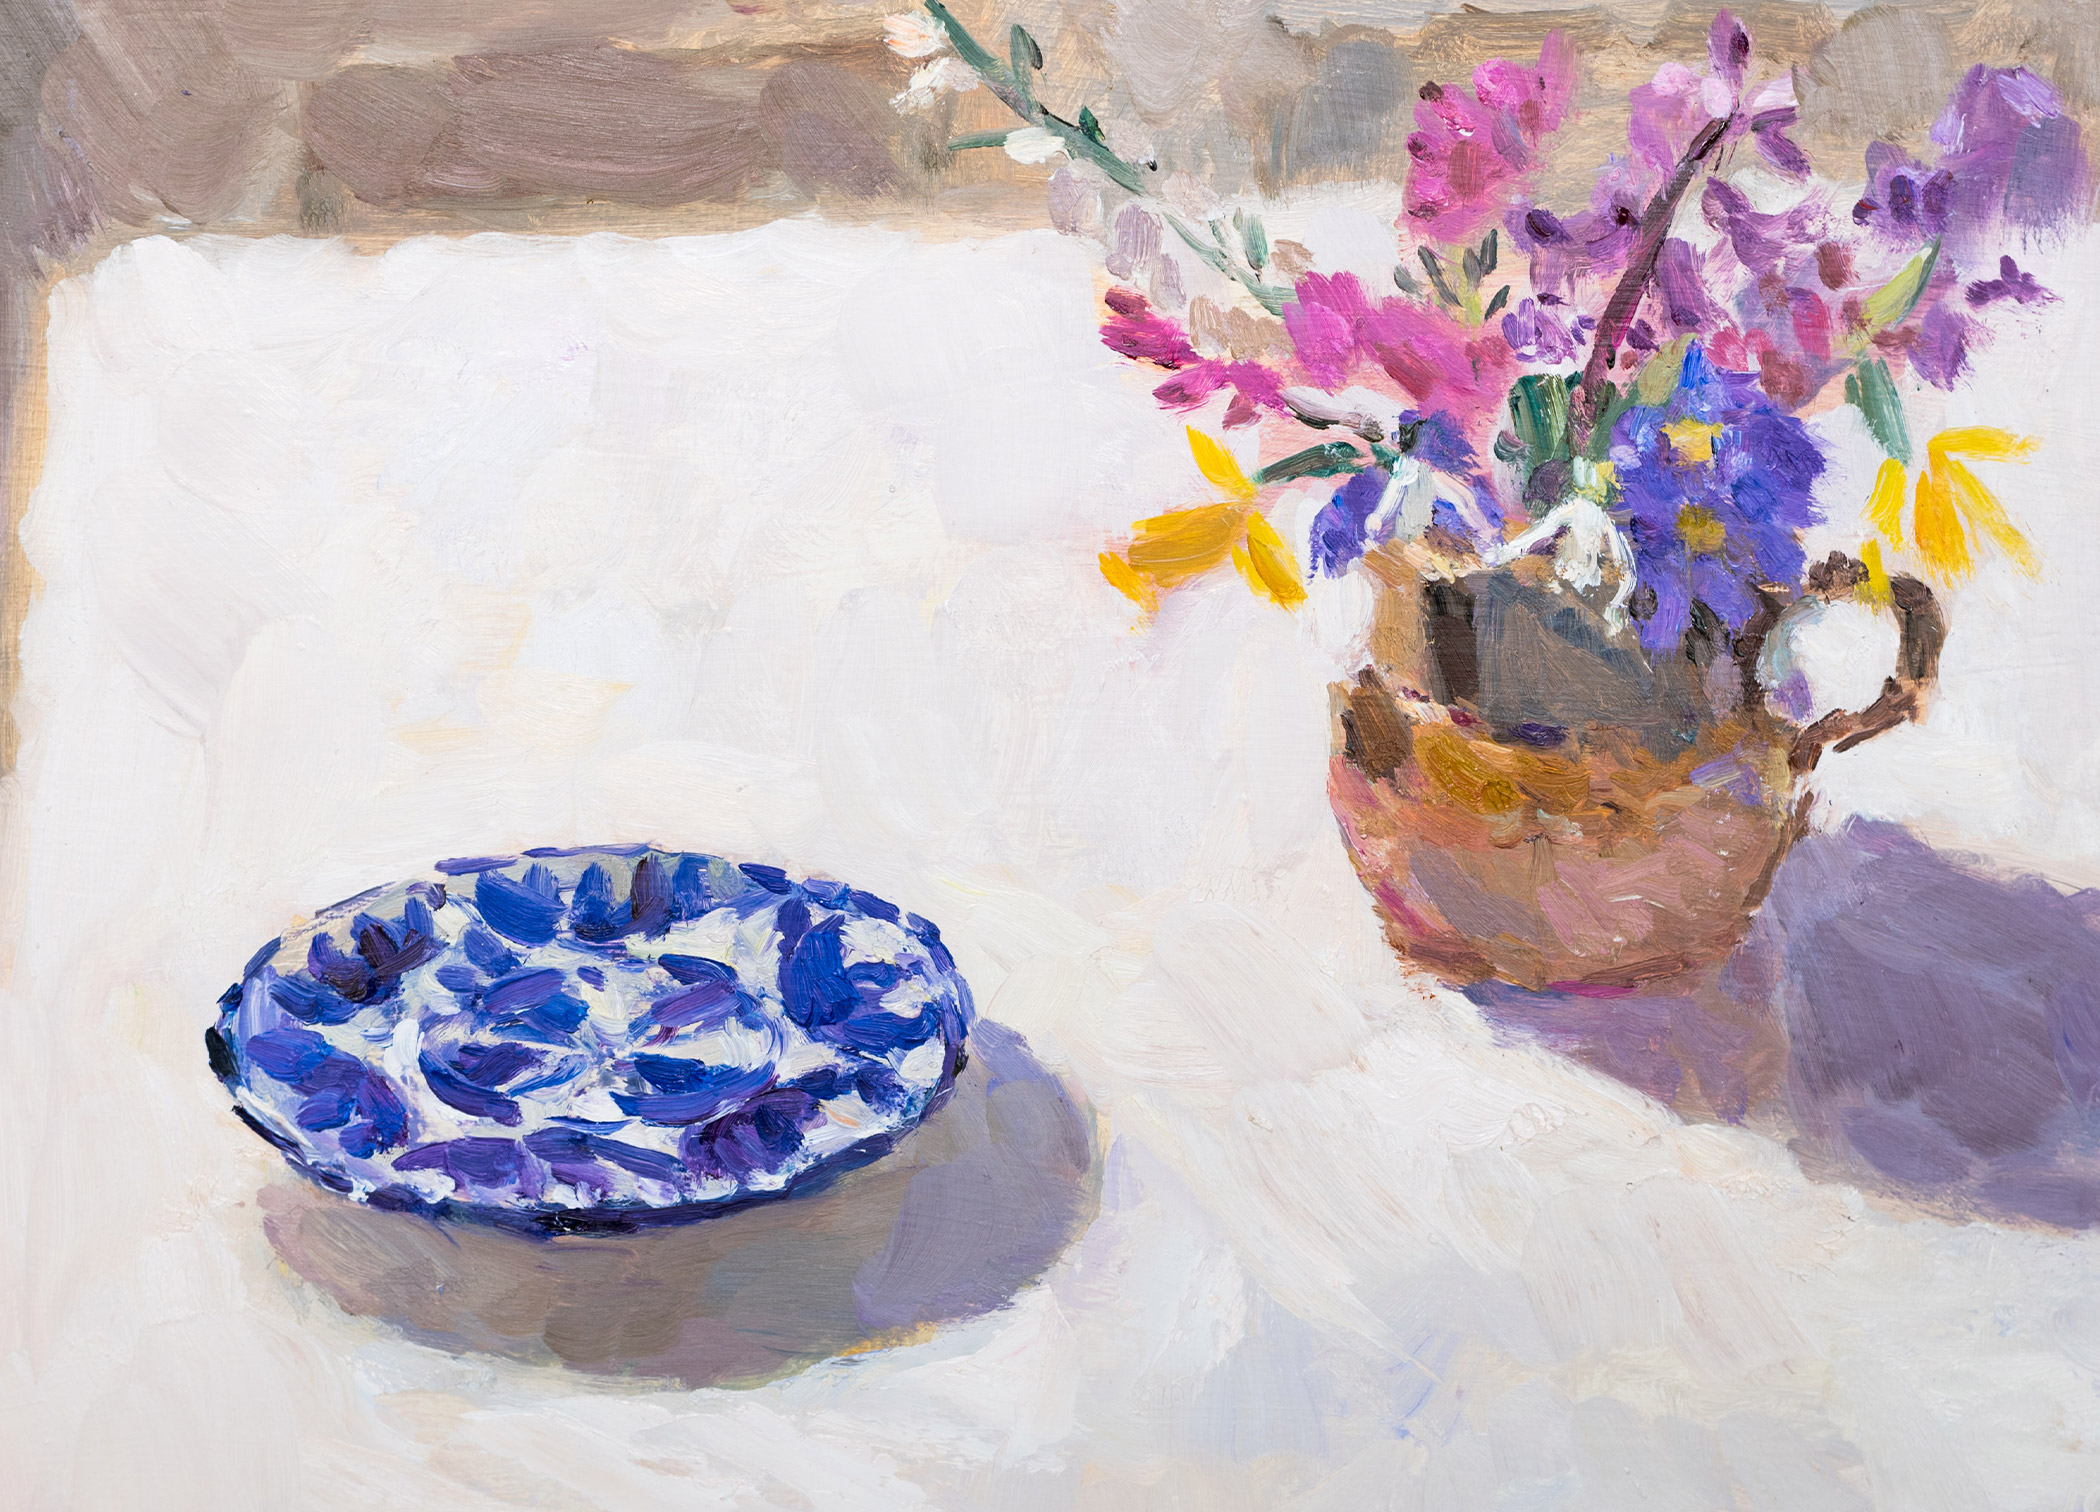 Spring Flowers with a Blue Patterned Plate